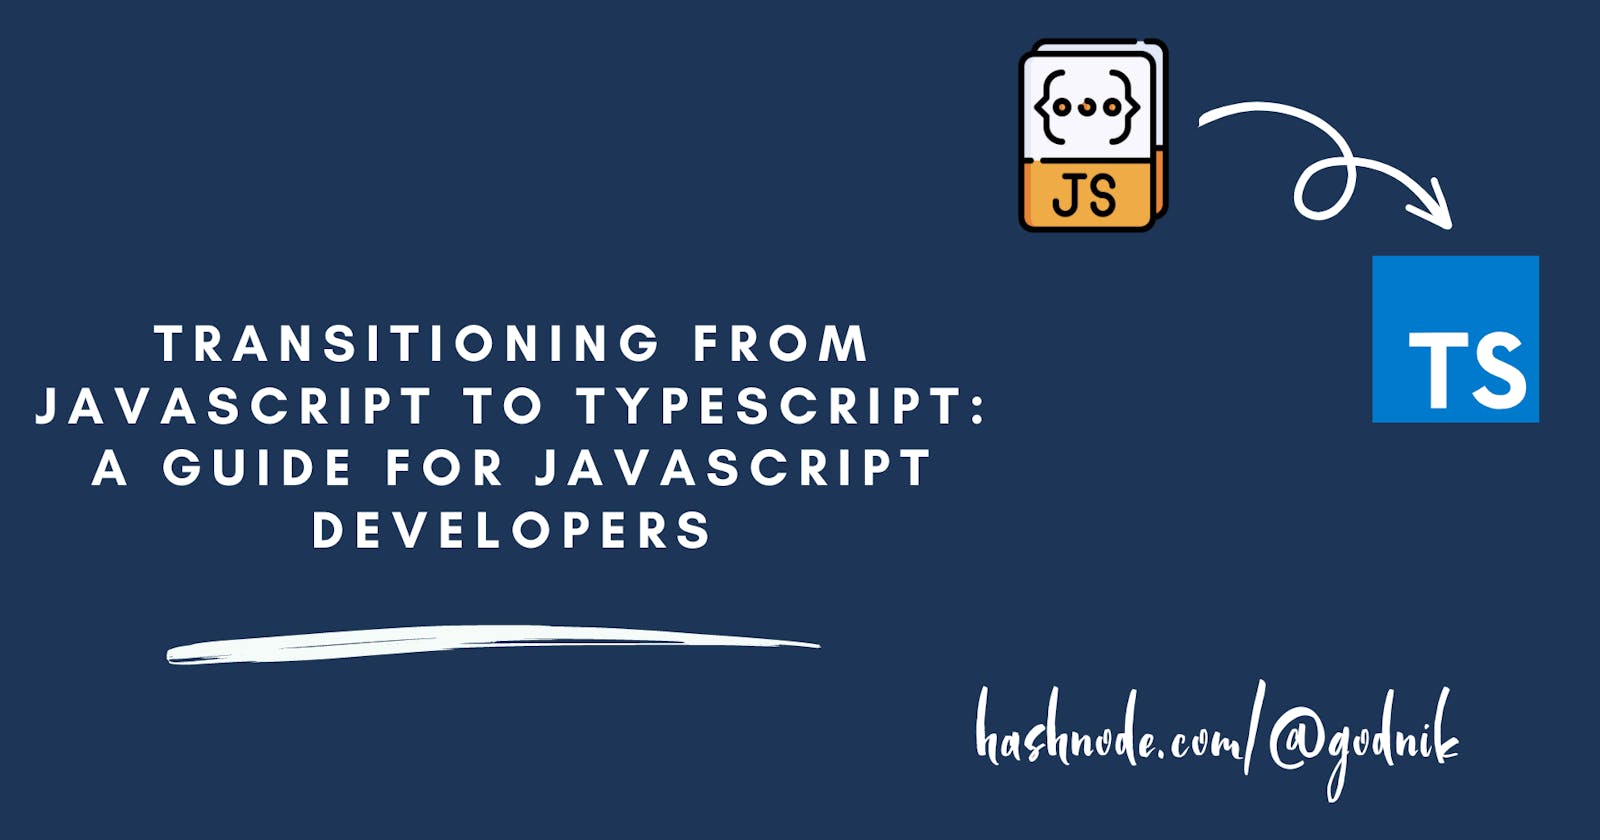 Transitioning from JavaScript to TypeScript: A Guide for JavaScript Developers